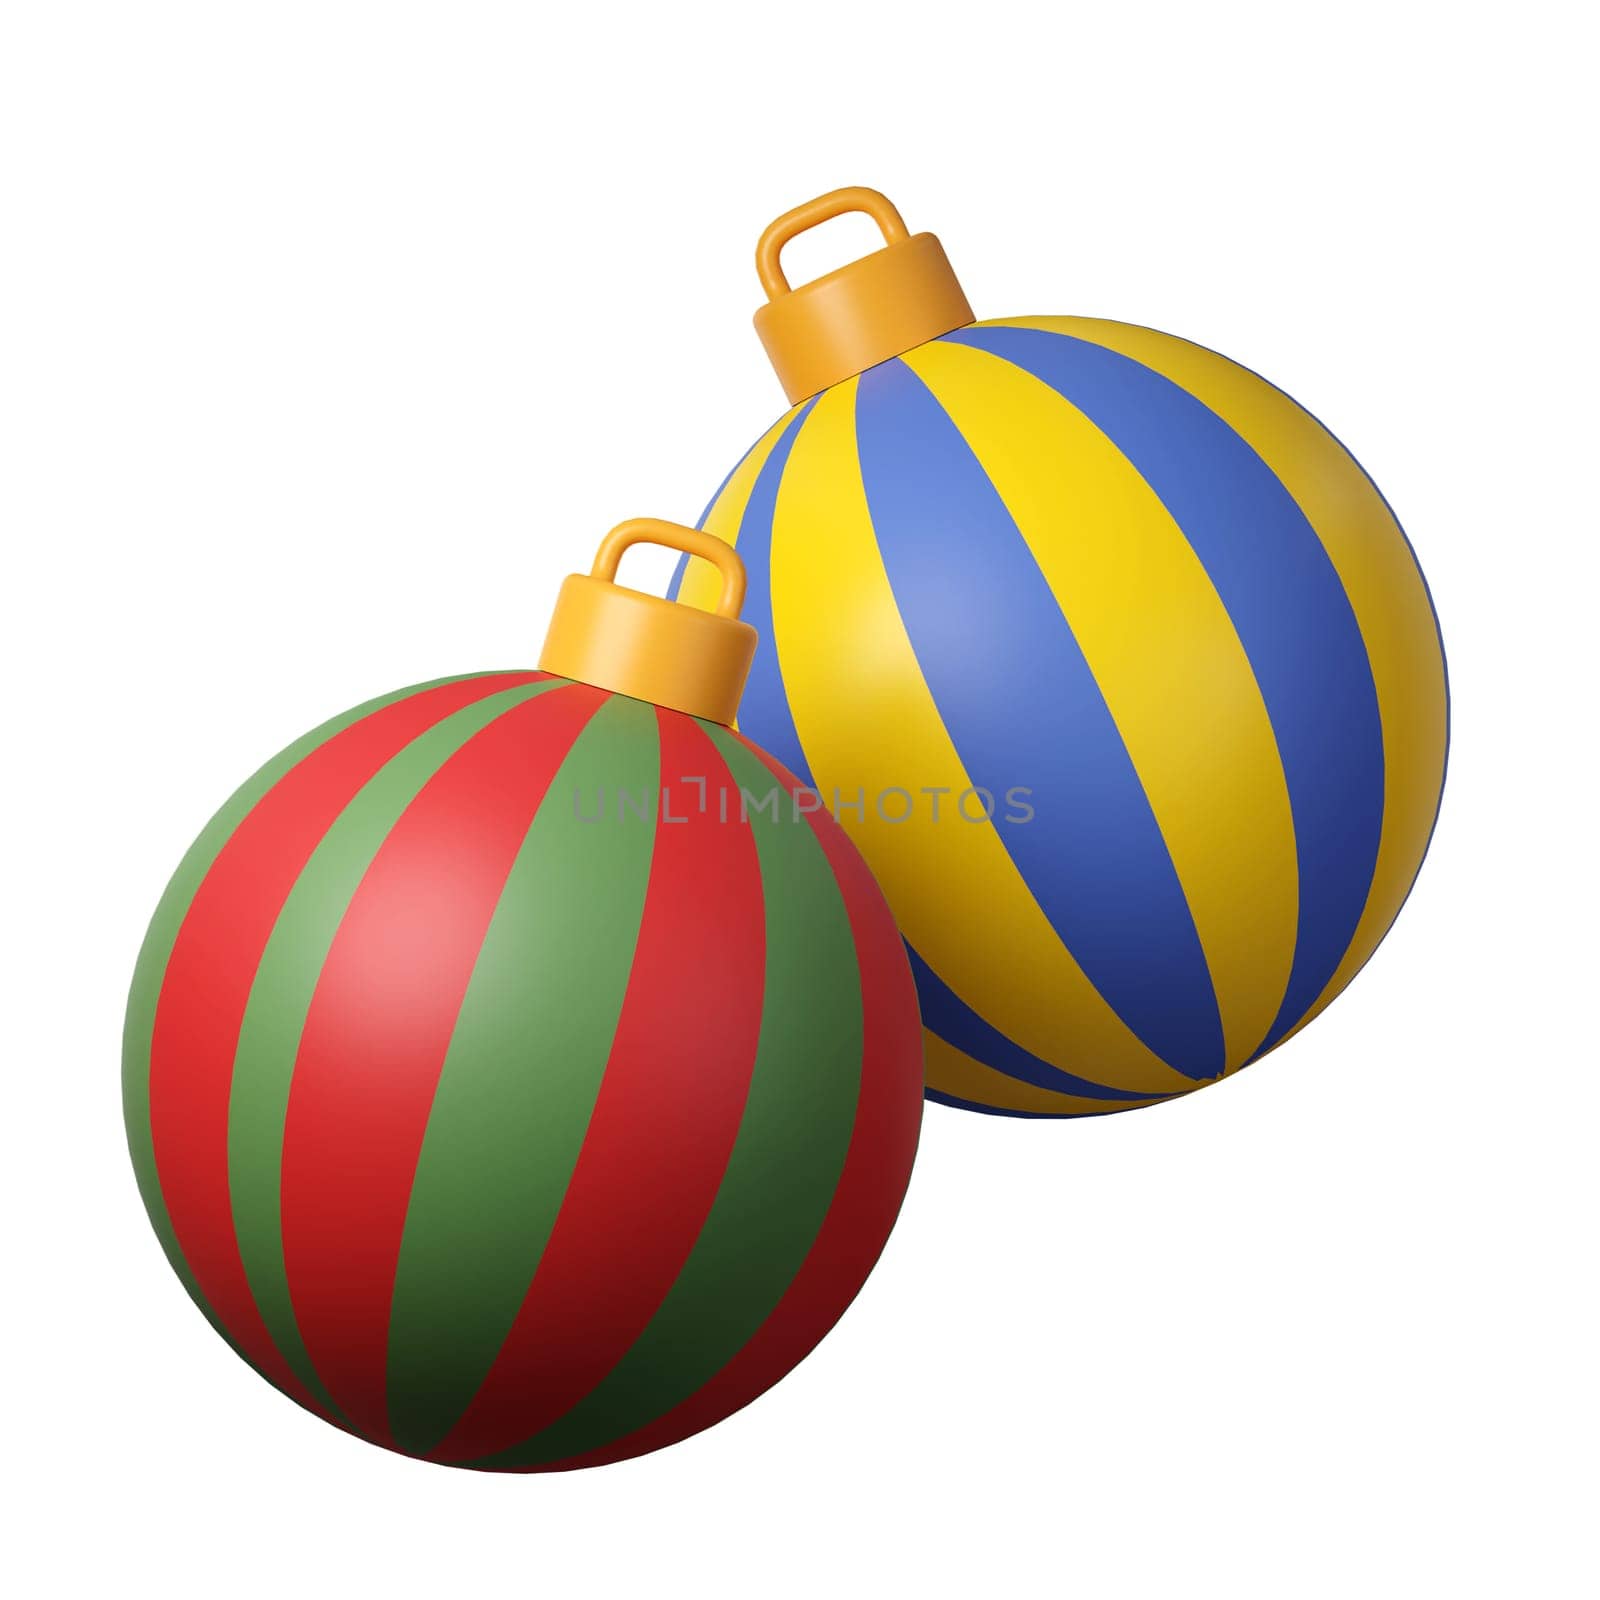 3d Christmas ball icon. minimal decorative festive conical shape tree. New Year's holiday decor. 3d design element In cartoon style. Icon isolated on white background. 3d illustration by meepiangraphic